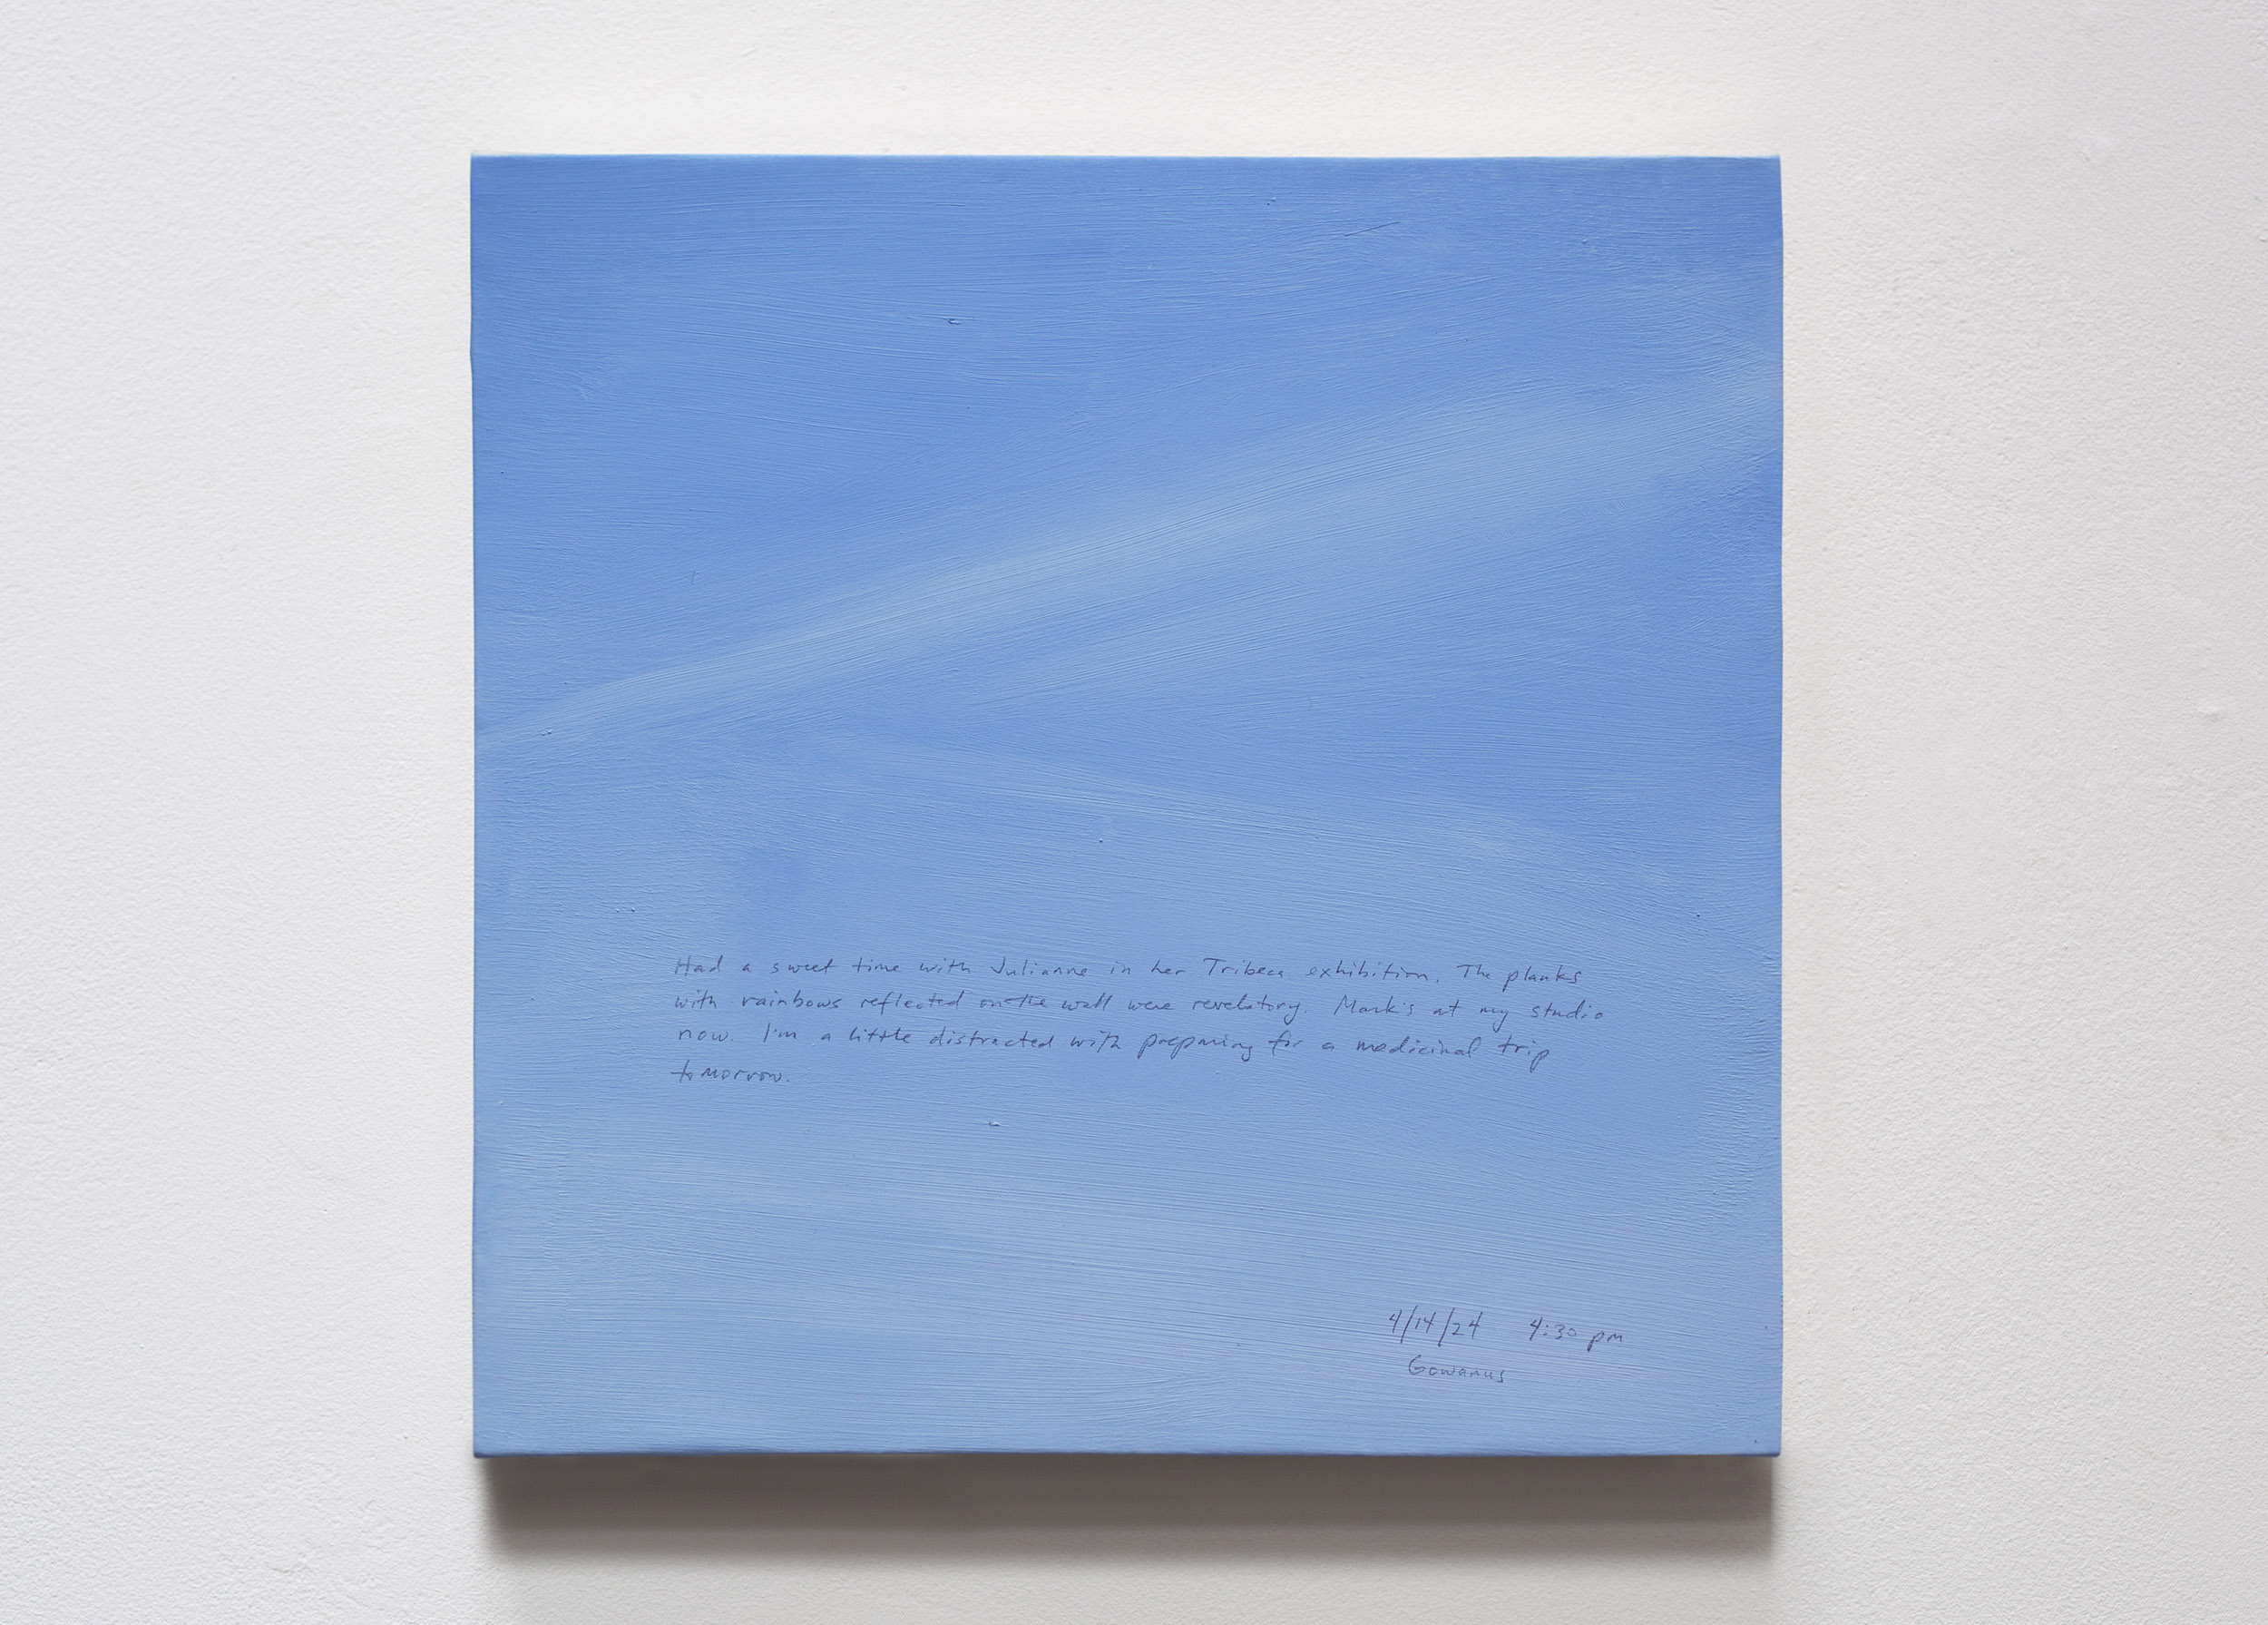 A 14 × 14 inch, acrylic painting of the sky. A journal entry is handwritten on the painting:

“Had a sweet time with Julianne in her Tribeca exhibition. The planks with rainbows reflected on the wall were revelatory. Mark’s at my studio now. I’m a little distracted with preparing for a medicinal trip tomorrow. 

4/14/24 4:30 pm
Gowanus”